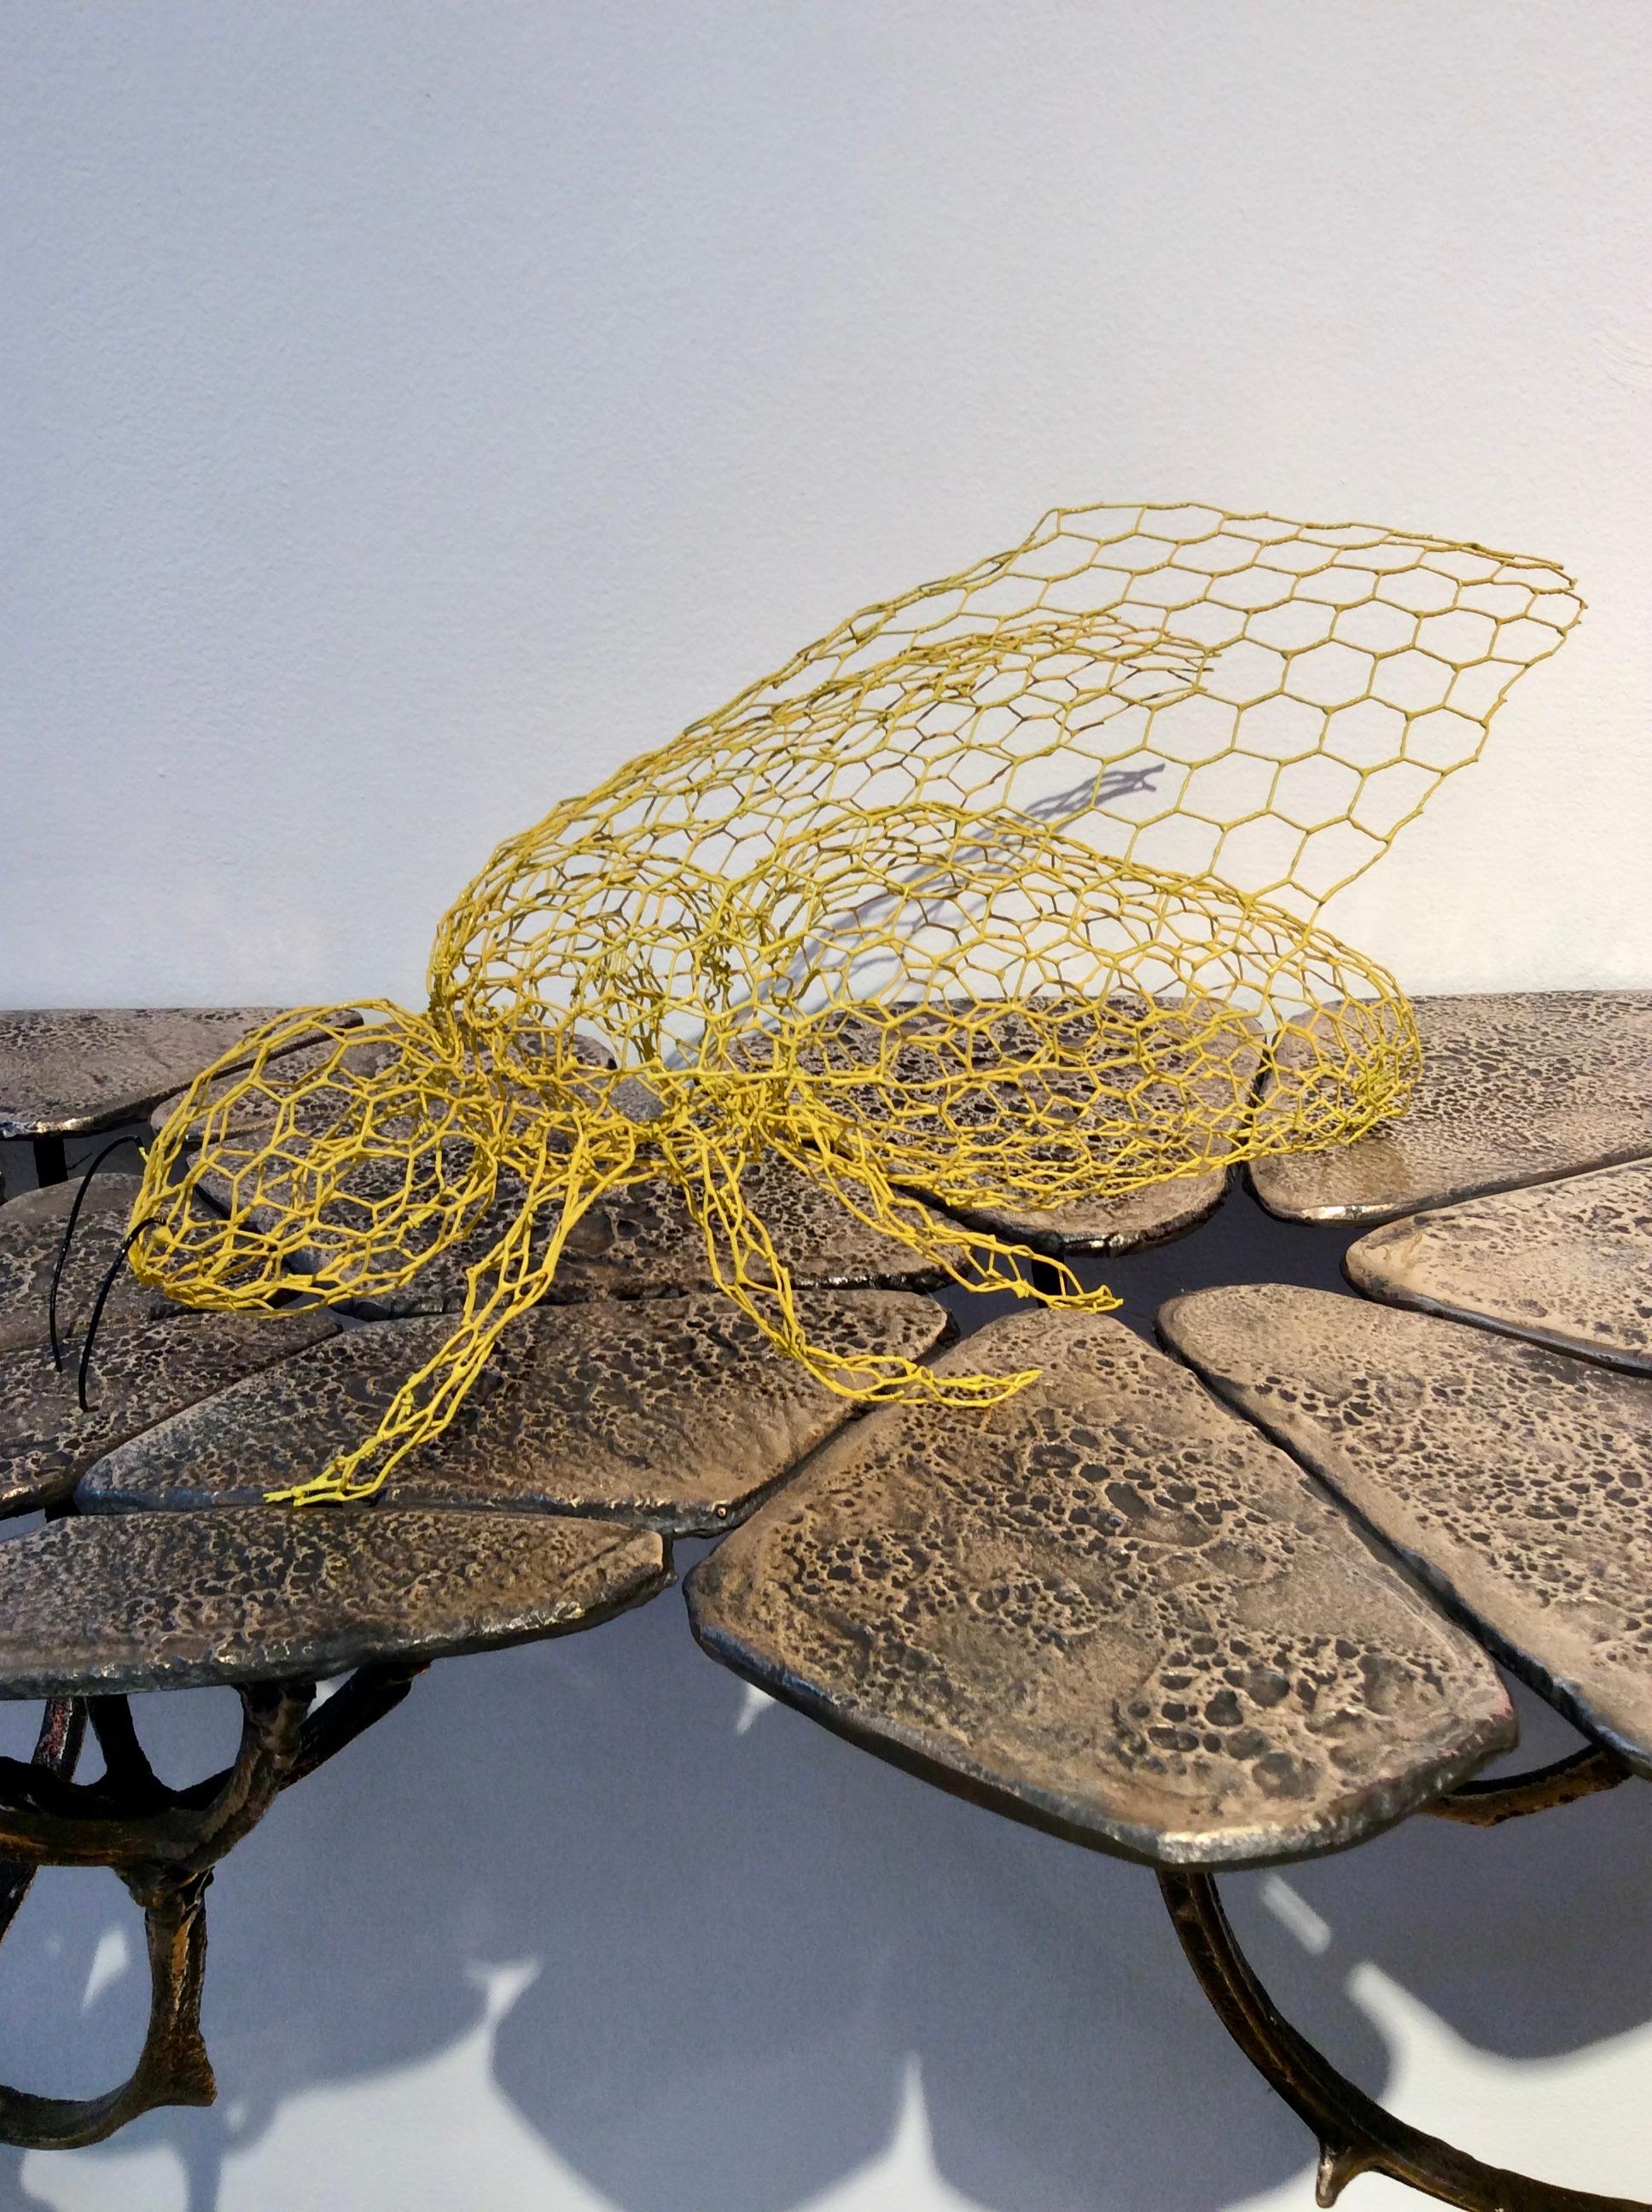 Charming hand-formed wire sculpture of a honeybee finished in bright yellow enamel paint and black antennae. Can be mounted on the wall easily if required.